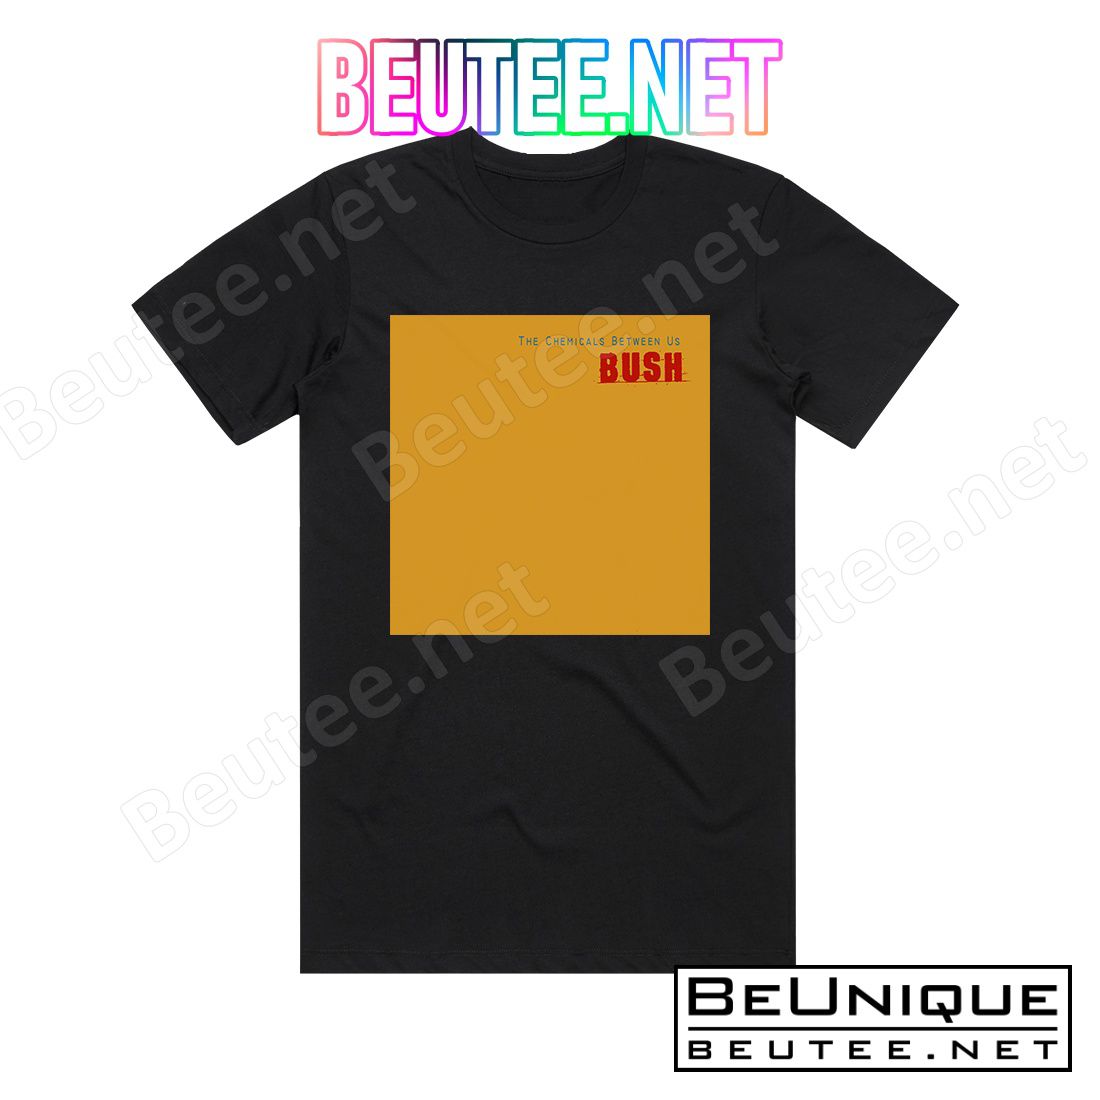 Bush The Chemicals Between Us 1 Album Cover T-Shirt